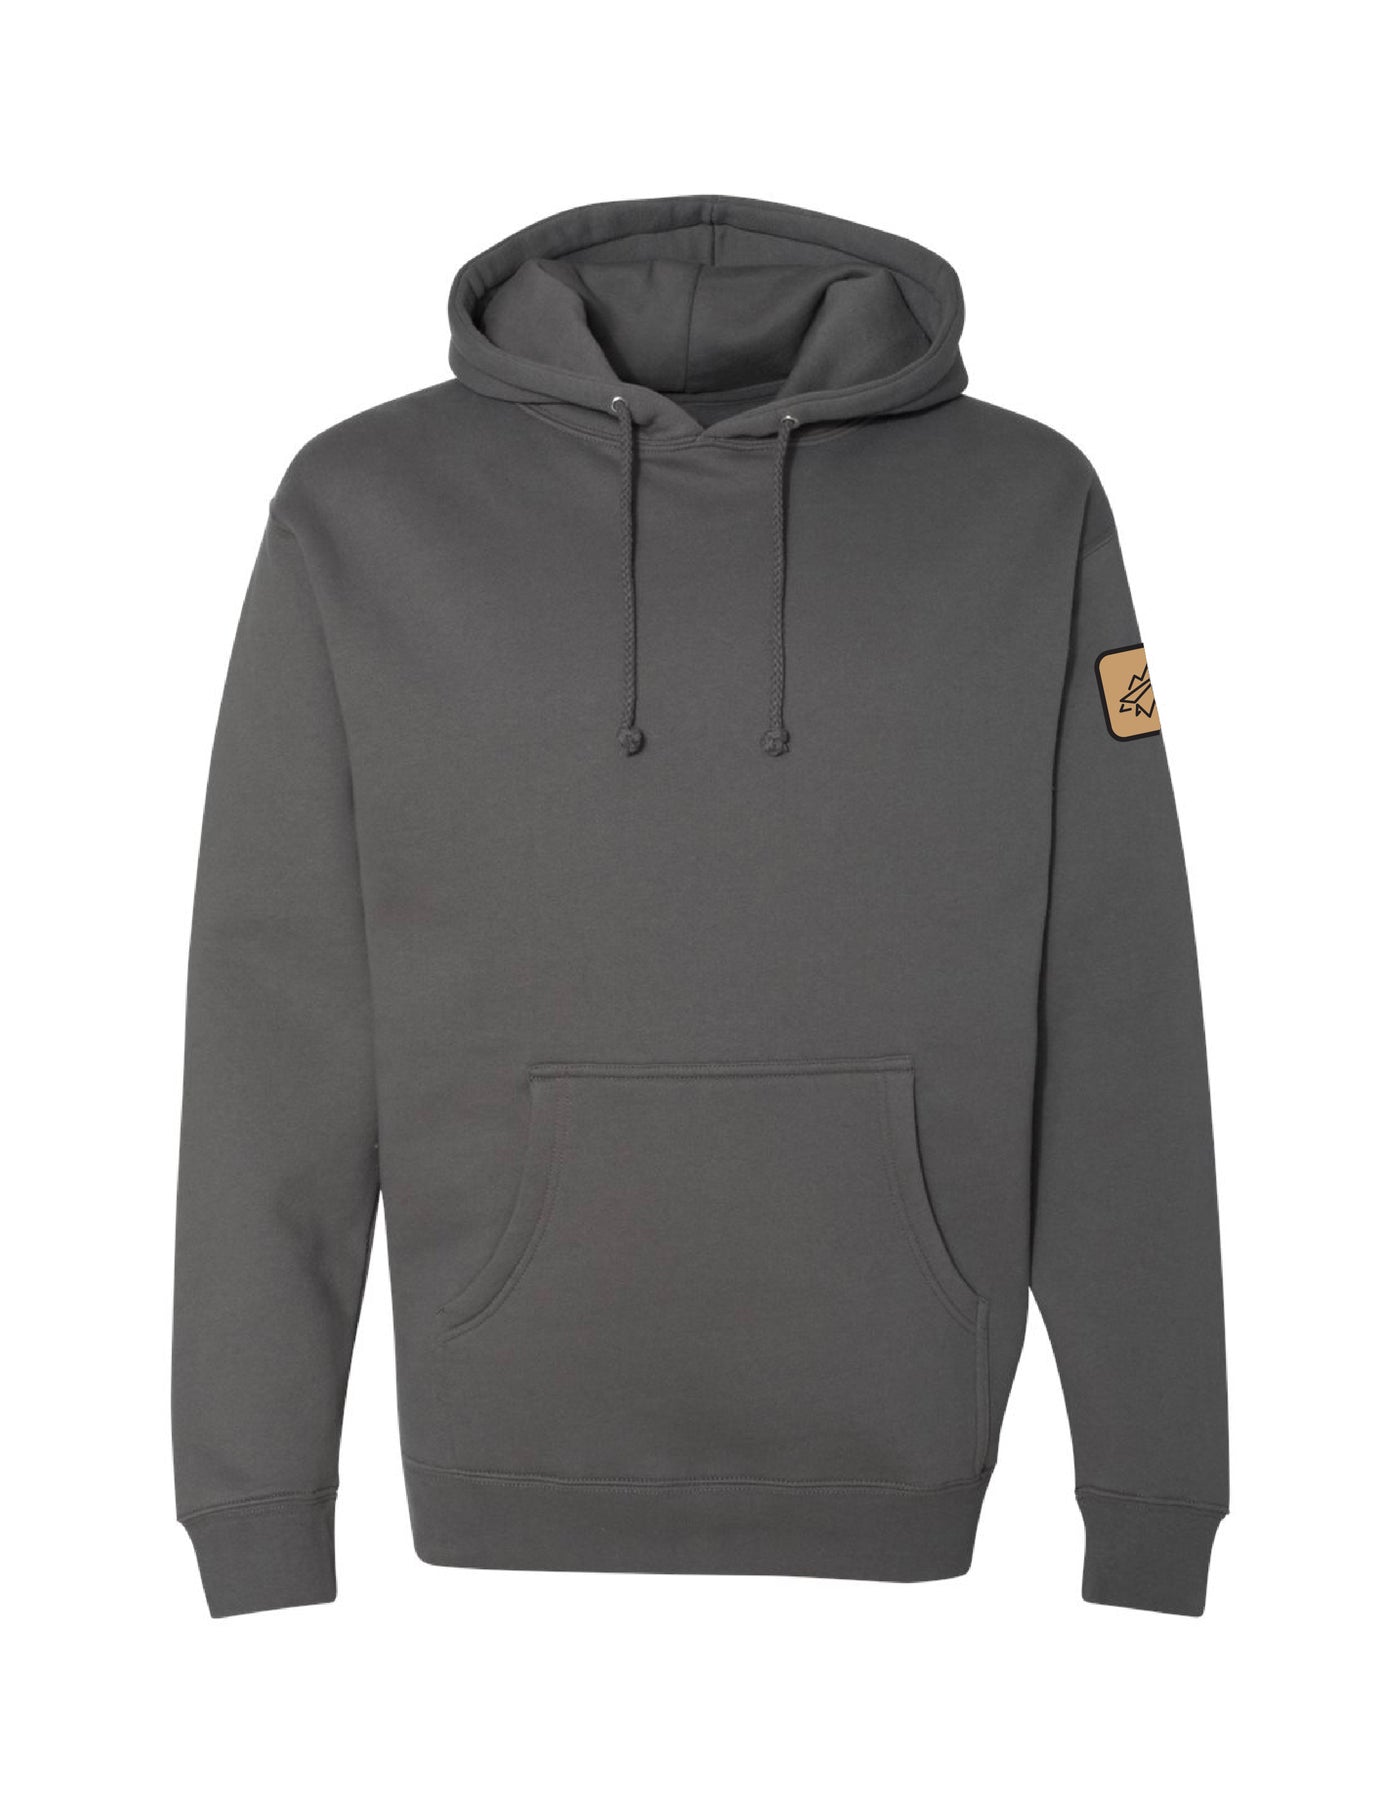 Patch Hoodie - Coal